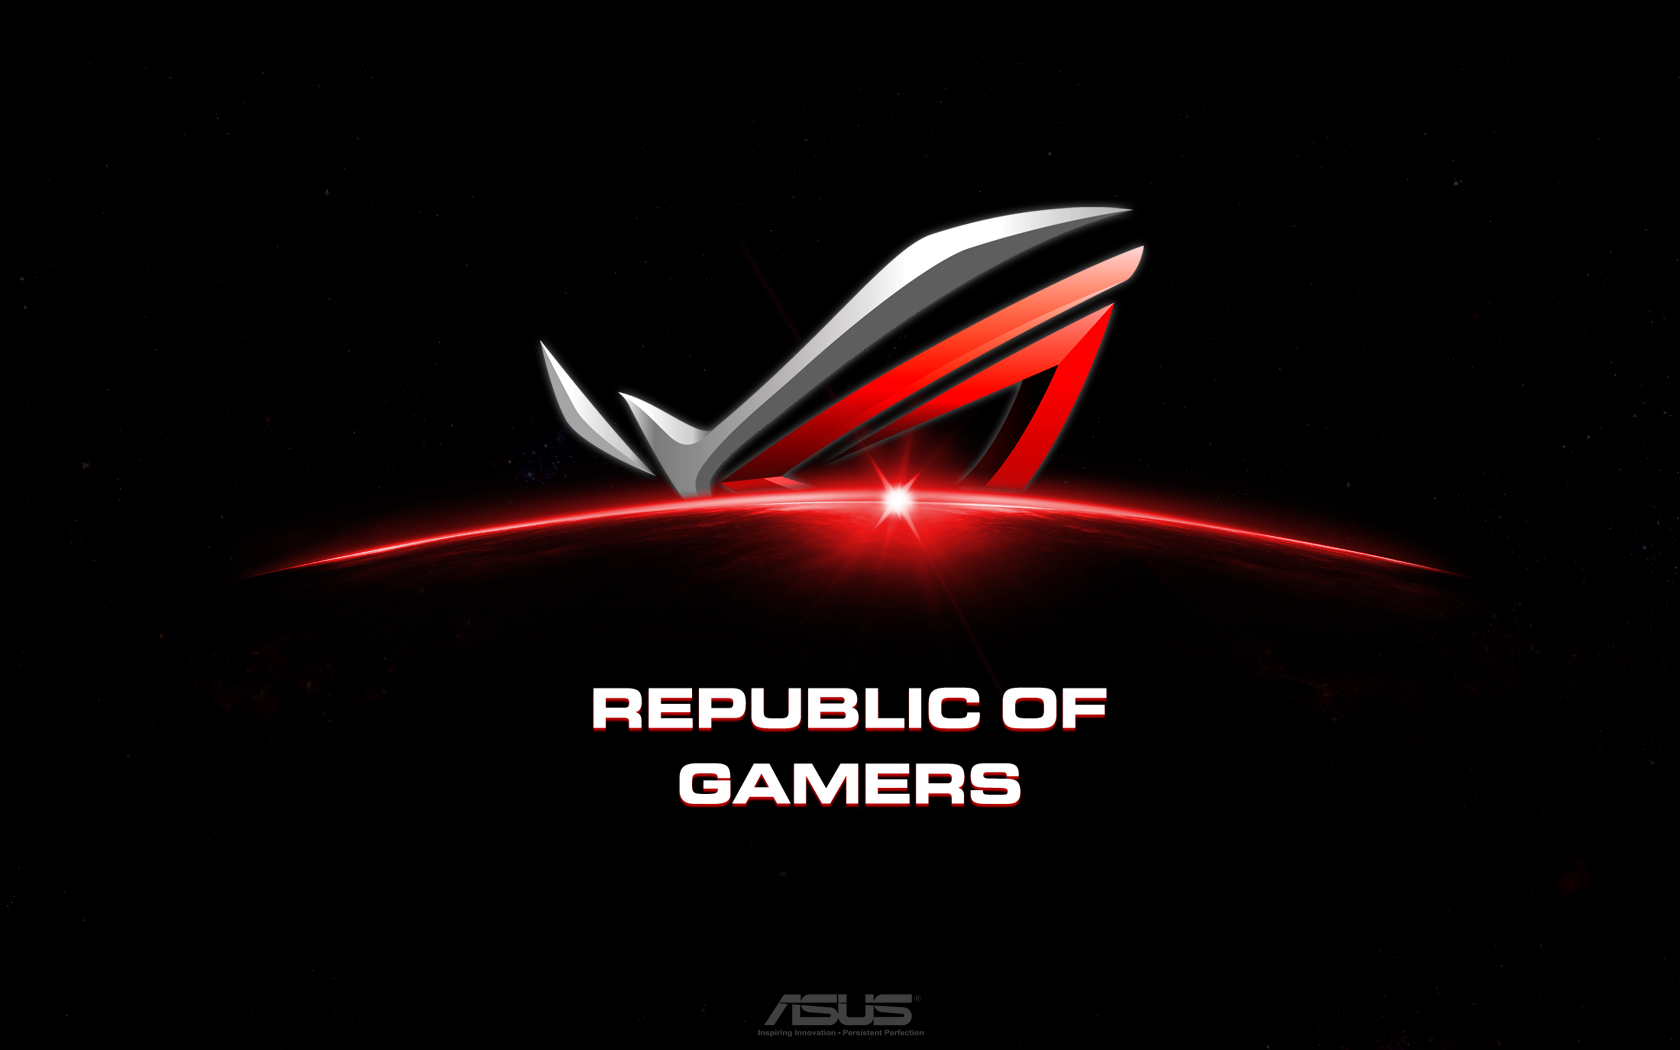 Red Asus Republic Gamers Wallpaper Pictures To